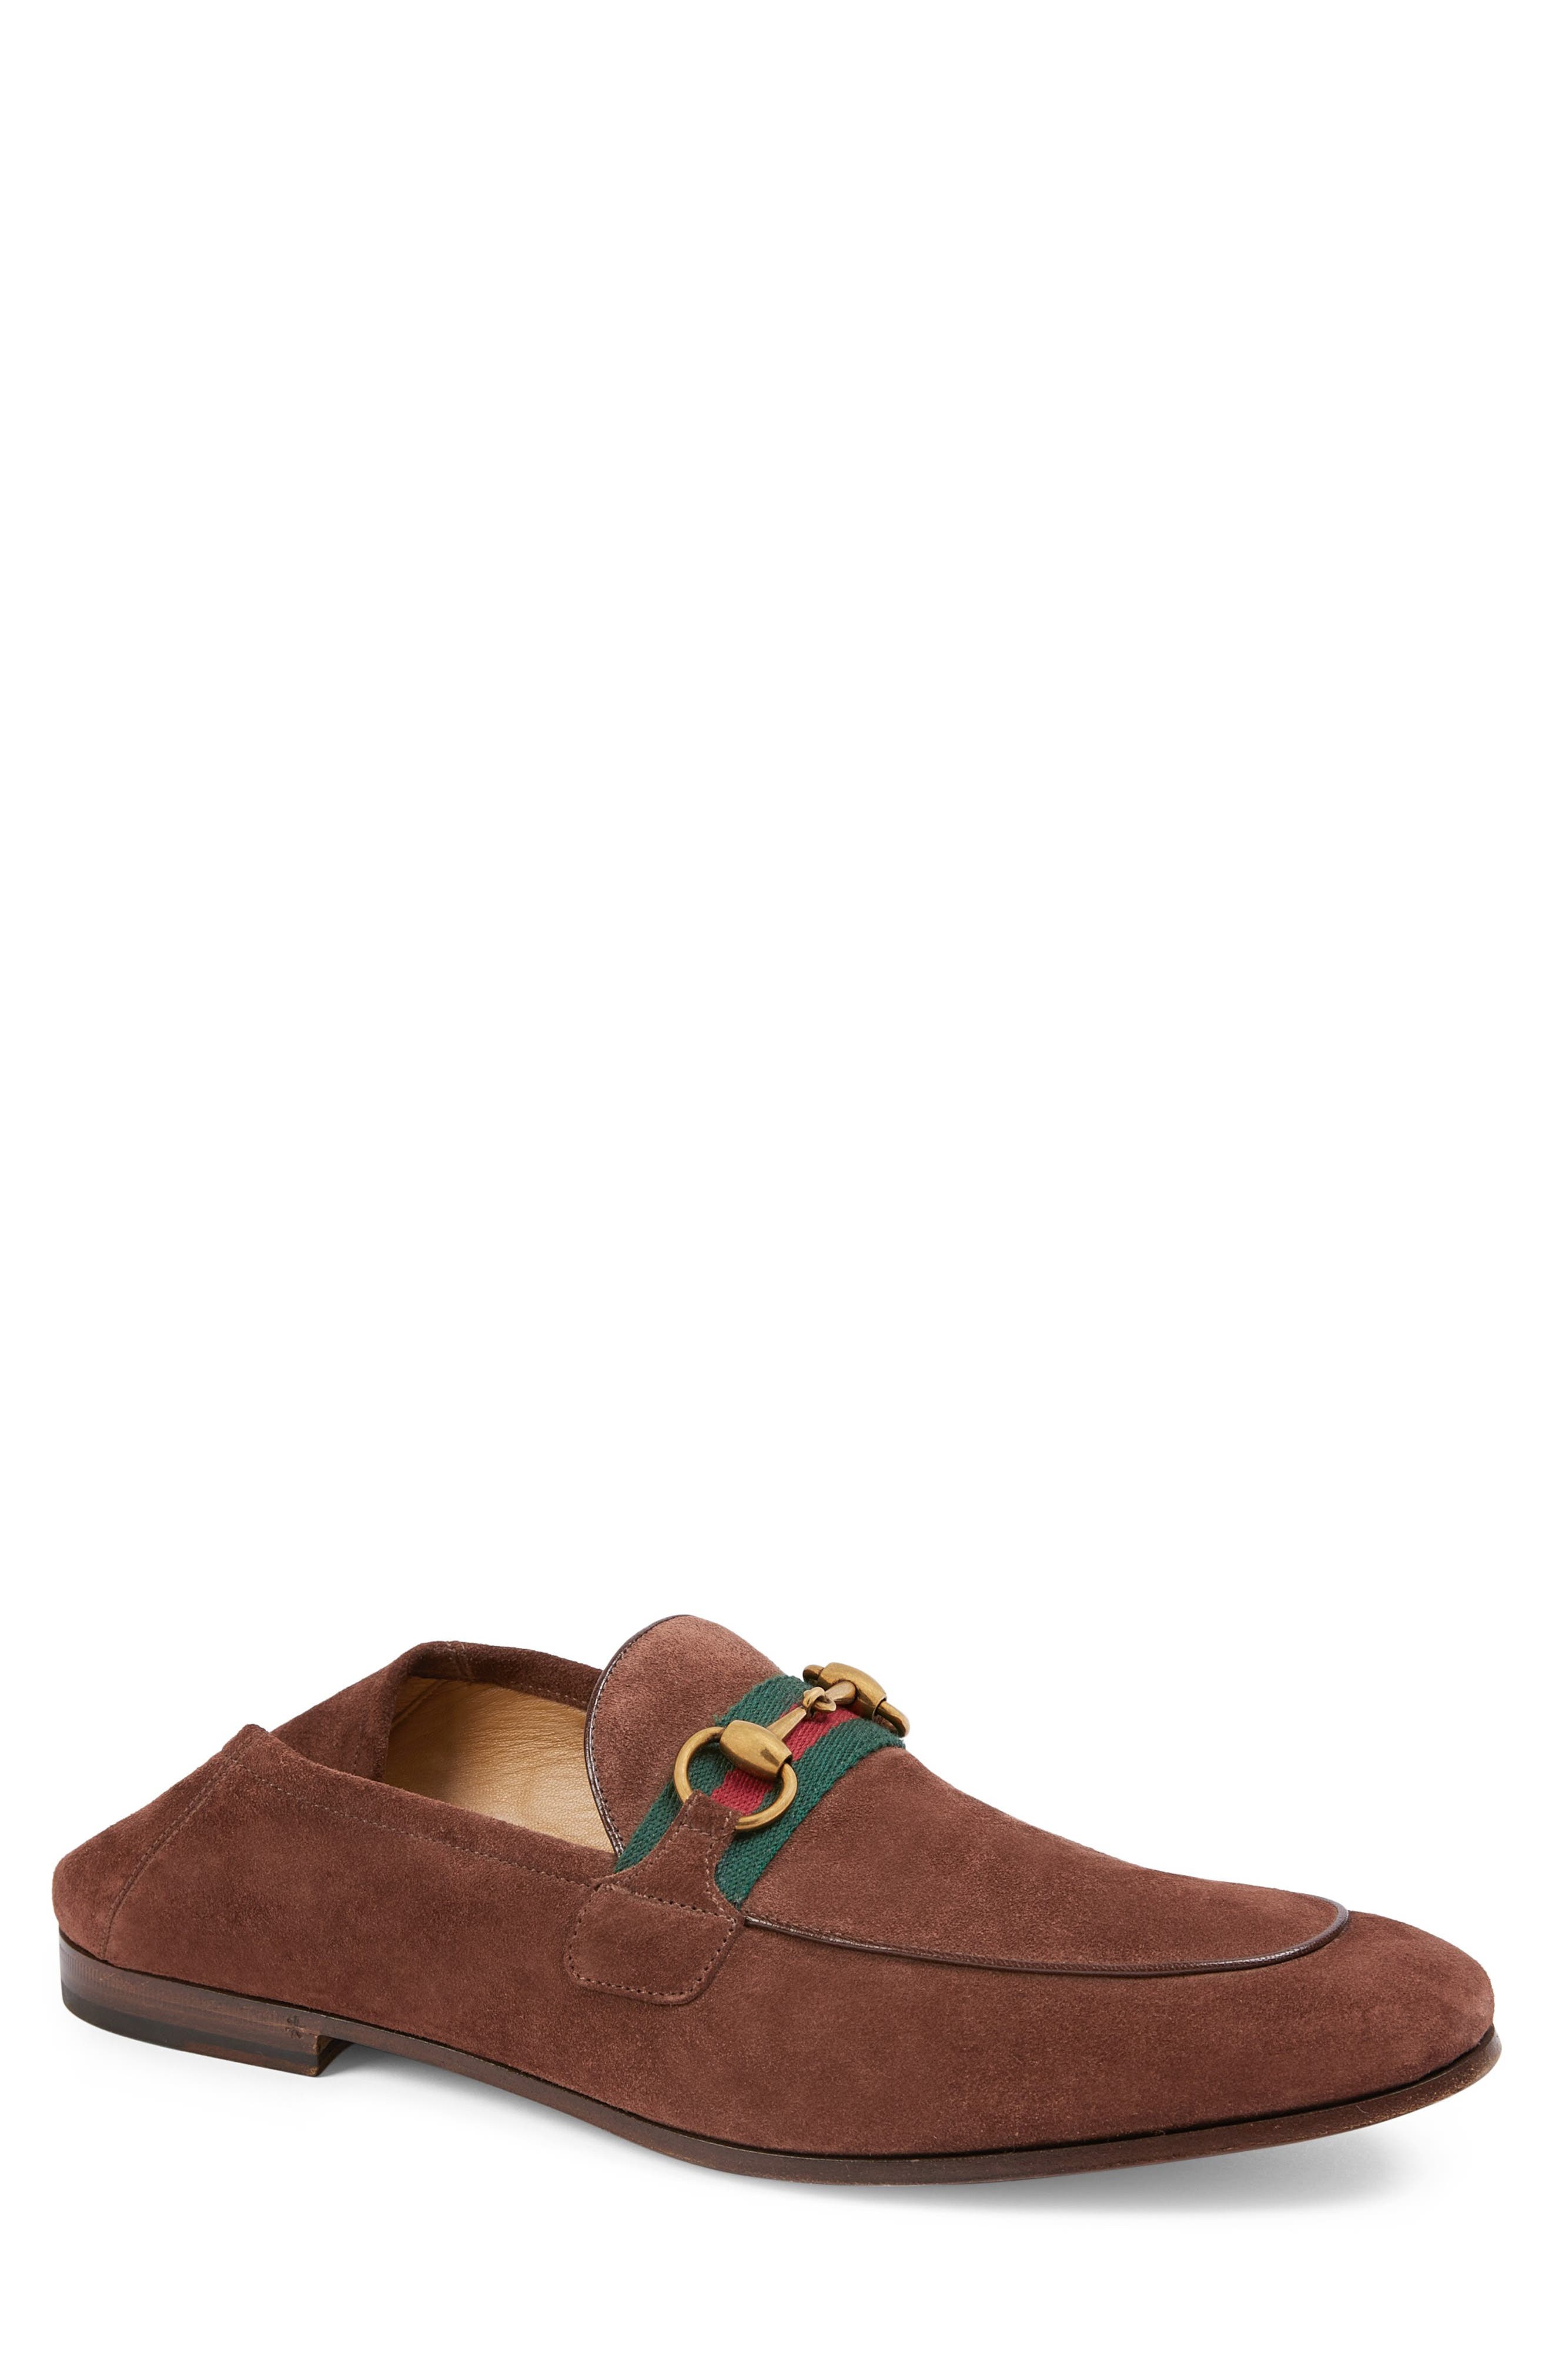 brixton convertible loafer gucci